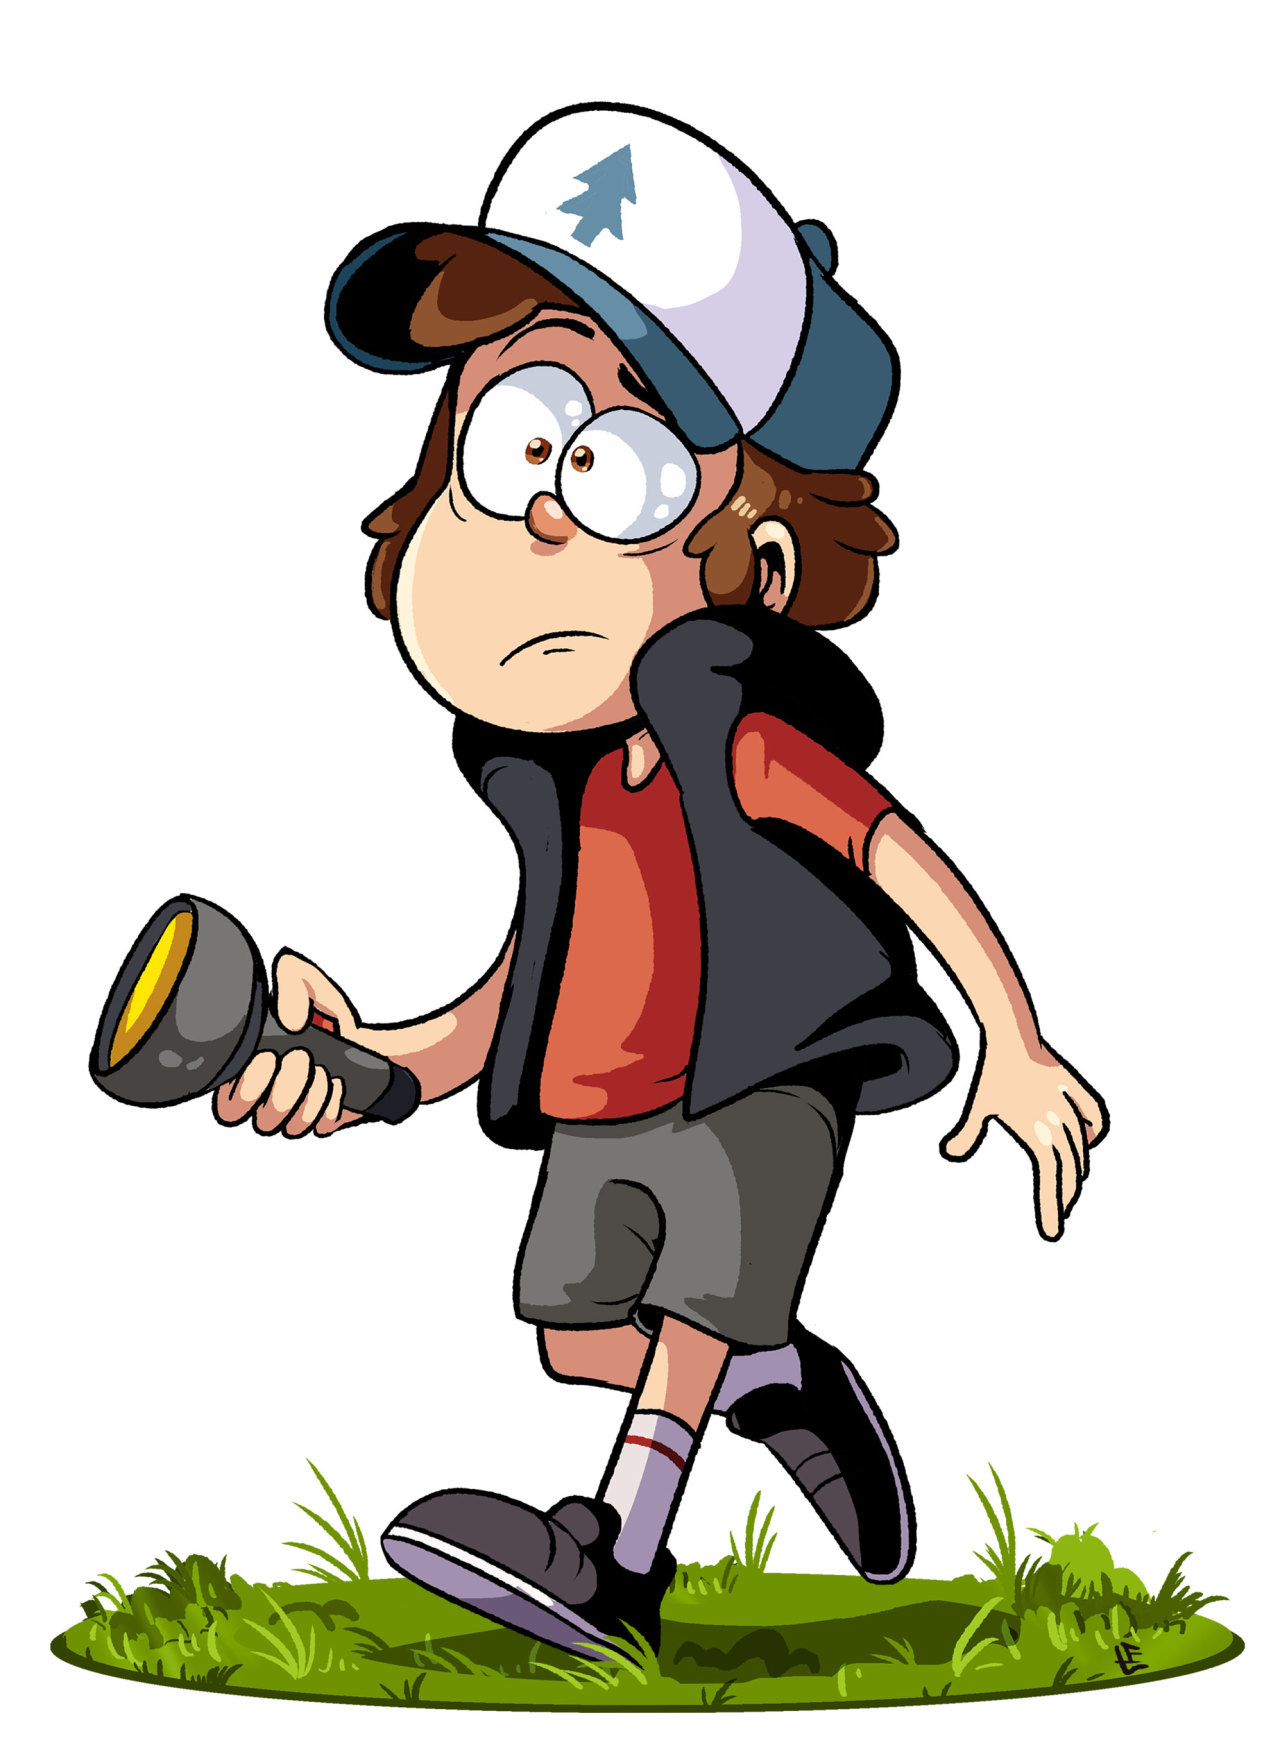 my favorite character from gravity falls????? | Tumblr